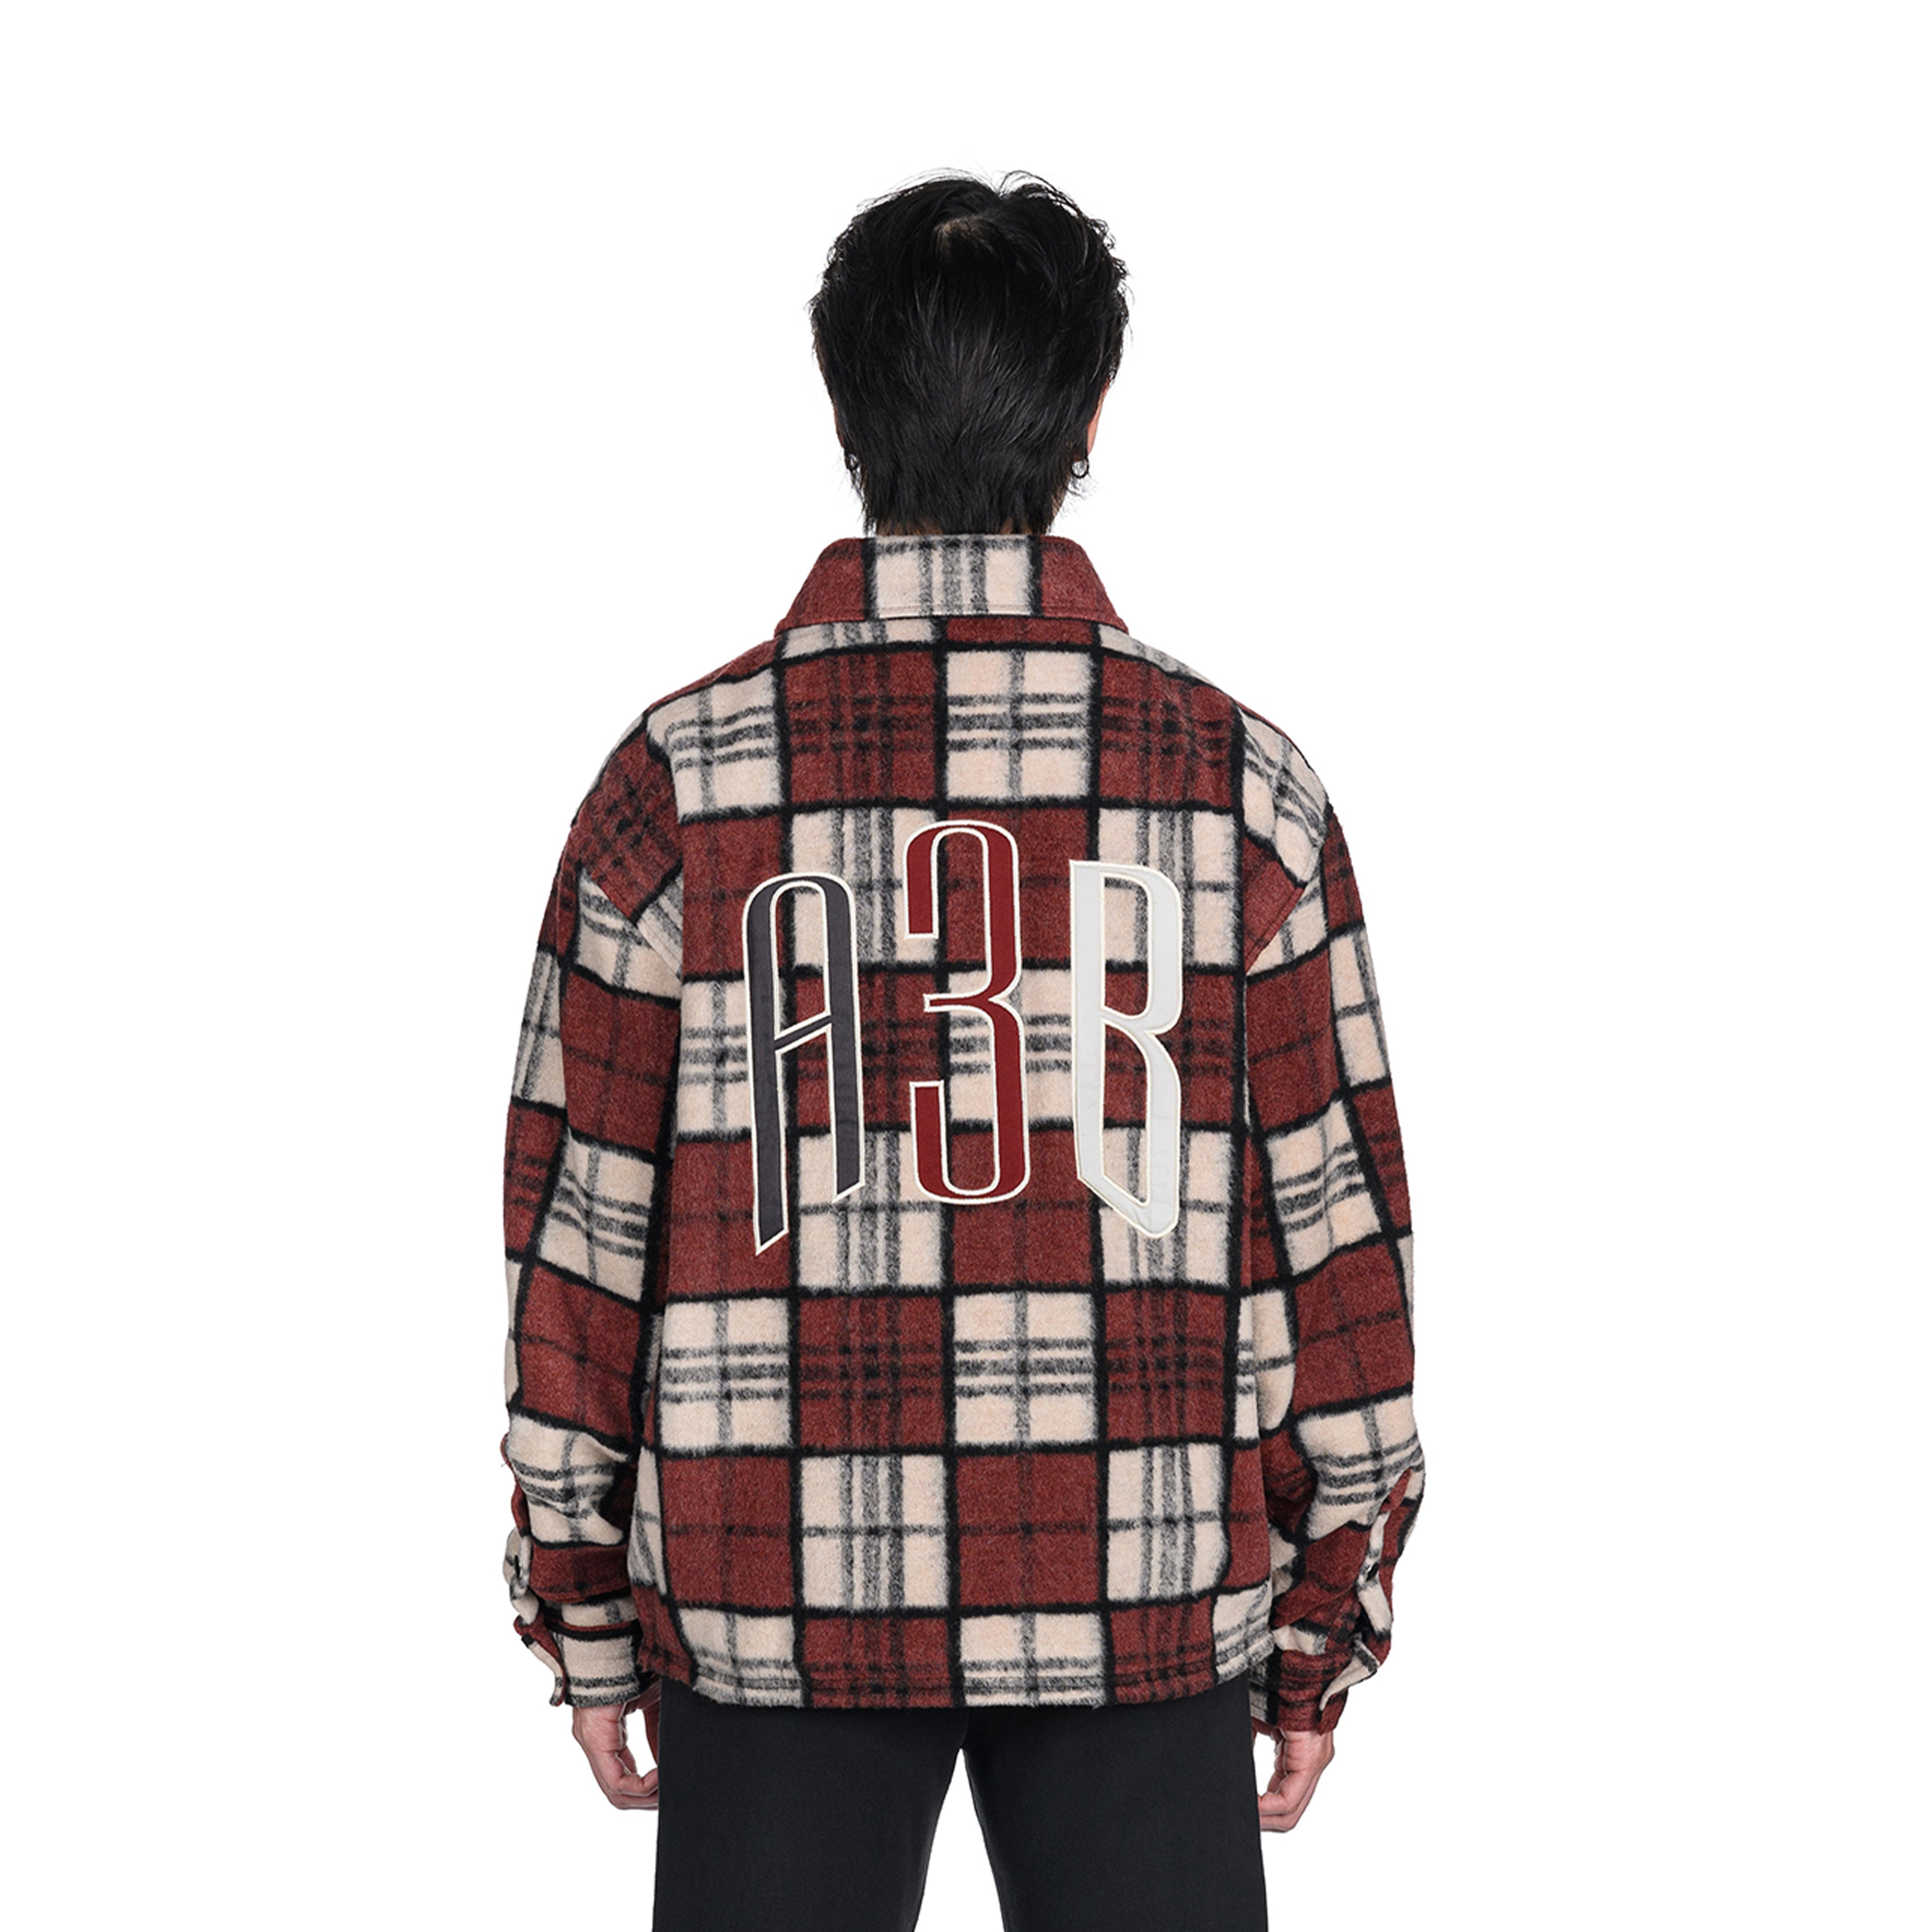 FLANNEL ZIP JACKET - RED - A3B